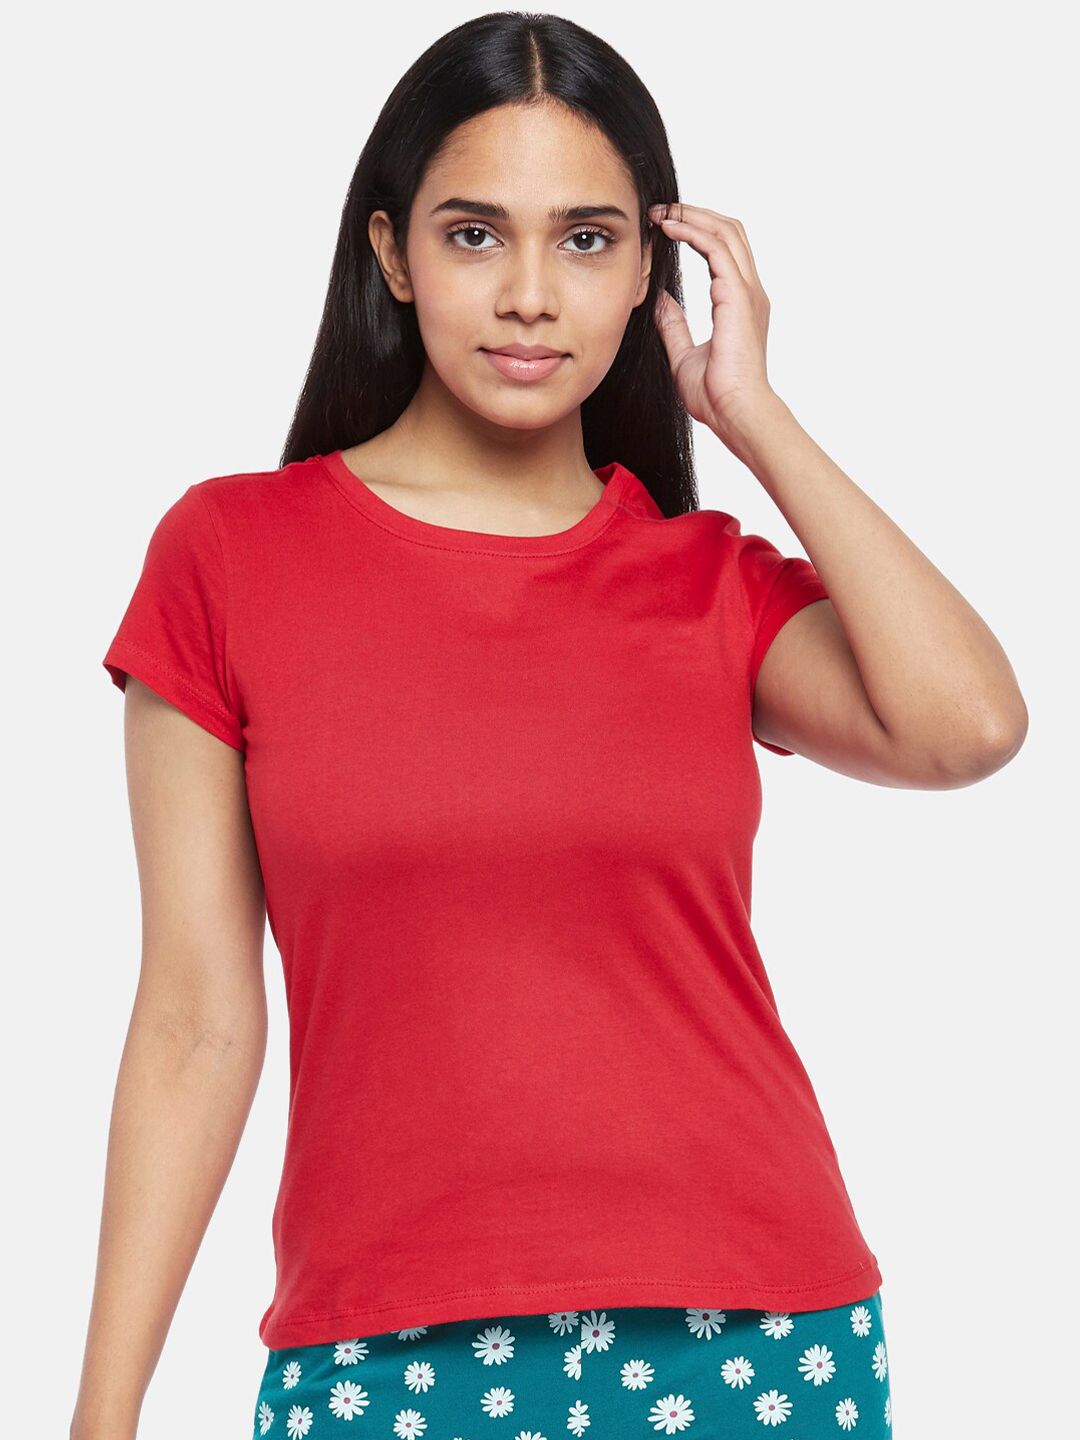 Dreamz by Pantaloons Red Solid Lounge T-shirts Price in India